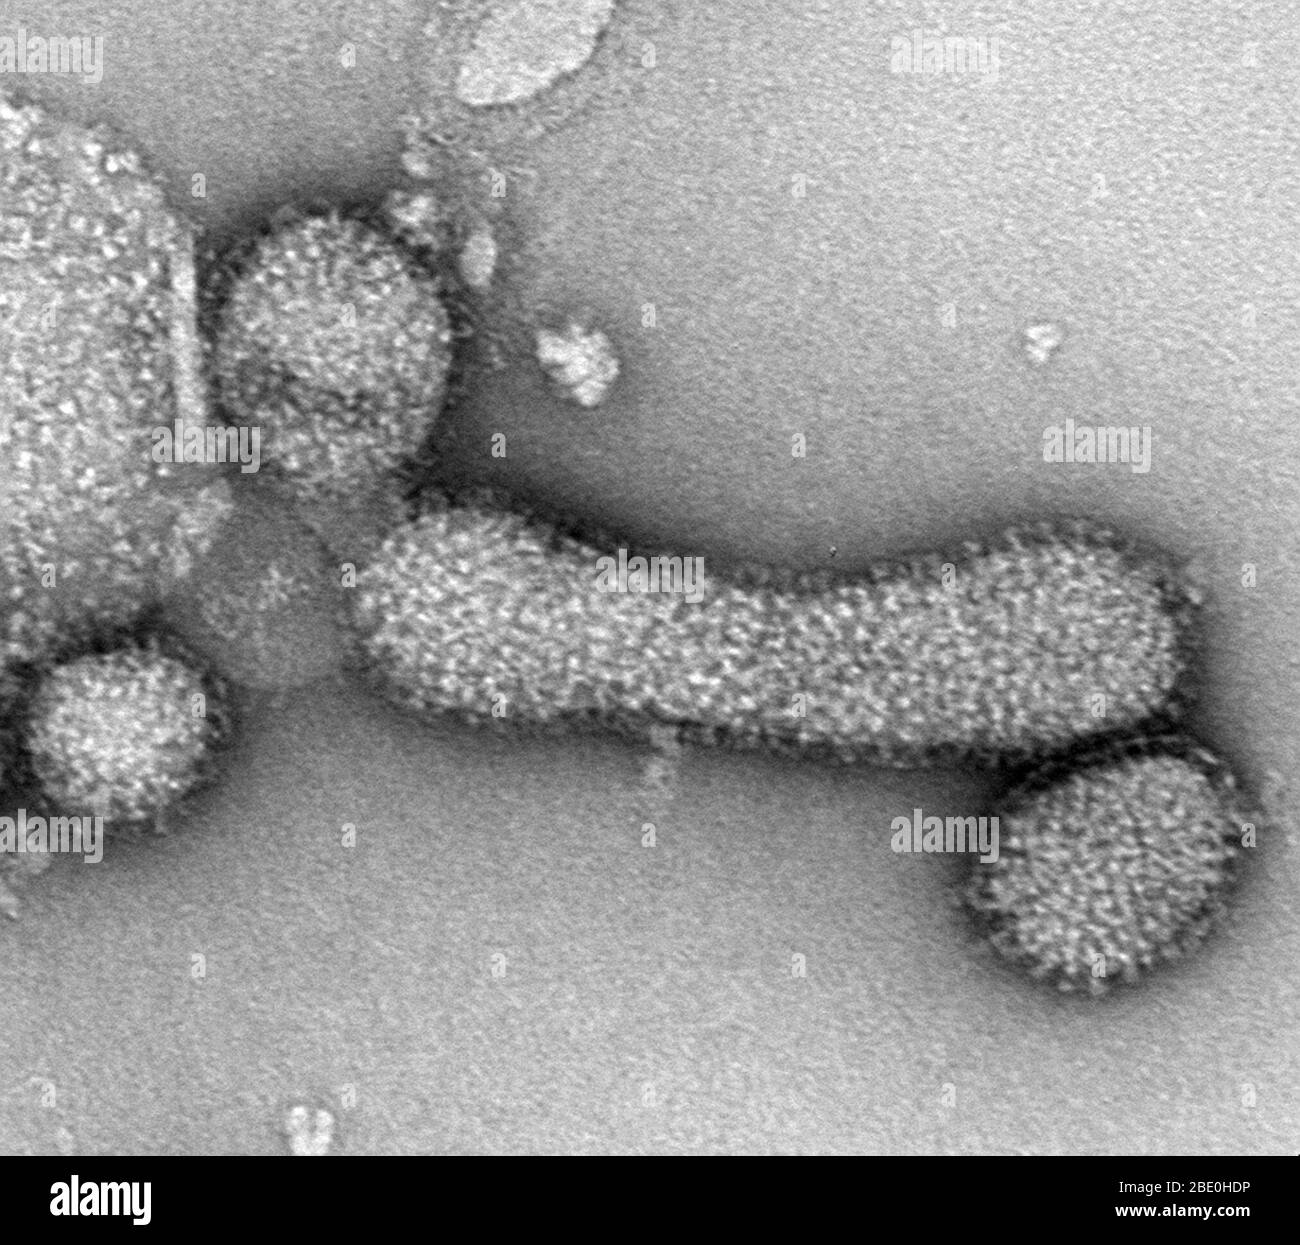 Negative stain Transmission Electron Micrograph (TEM) of the Influenza A (H1N1) virus, PR8 strain. Magnification unknown. Stock Photo